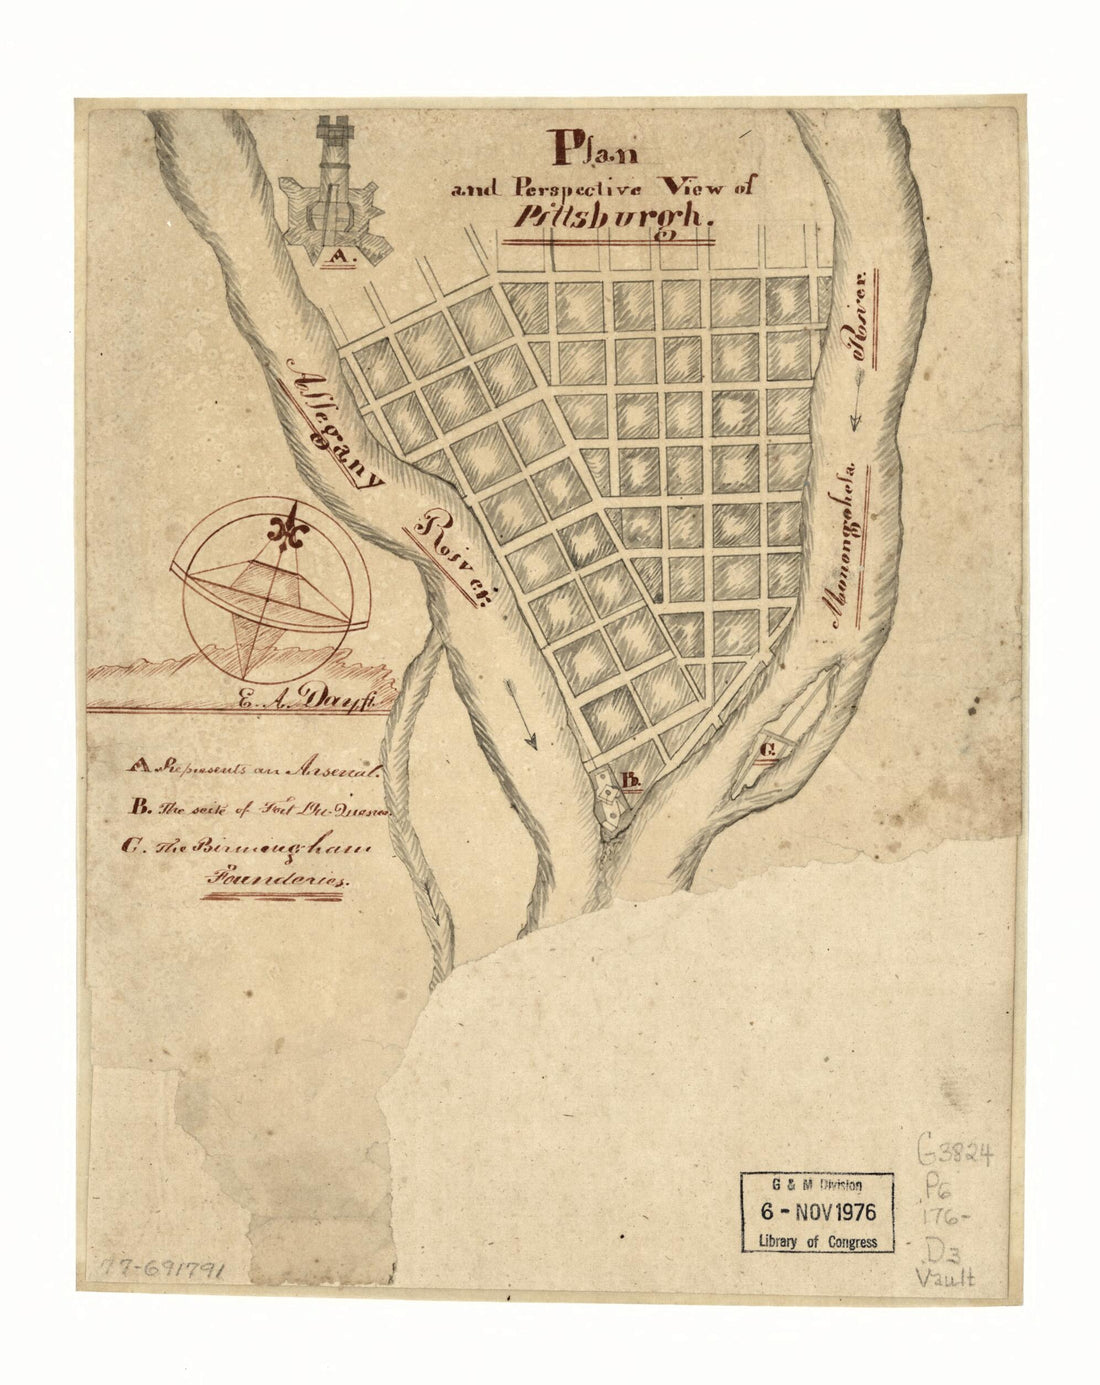 This old map of Plan and Perspective View of Pittsburgh from 1760 was created by E. A. Day in 1760